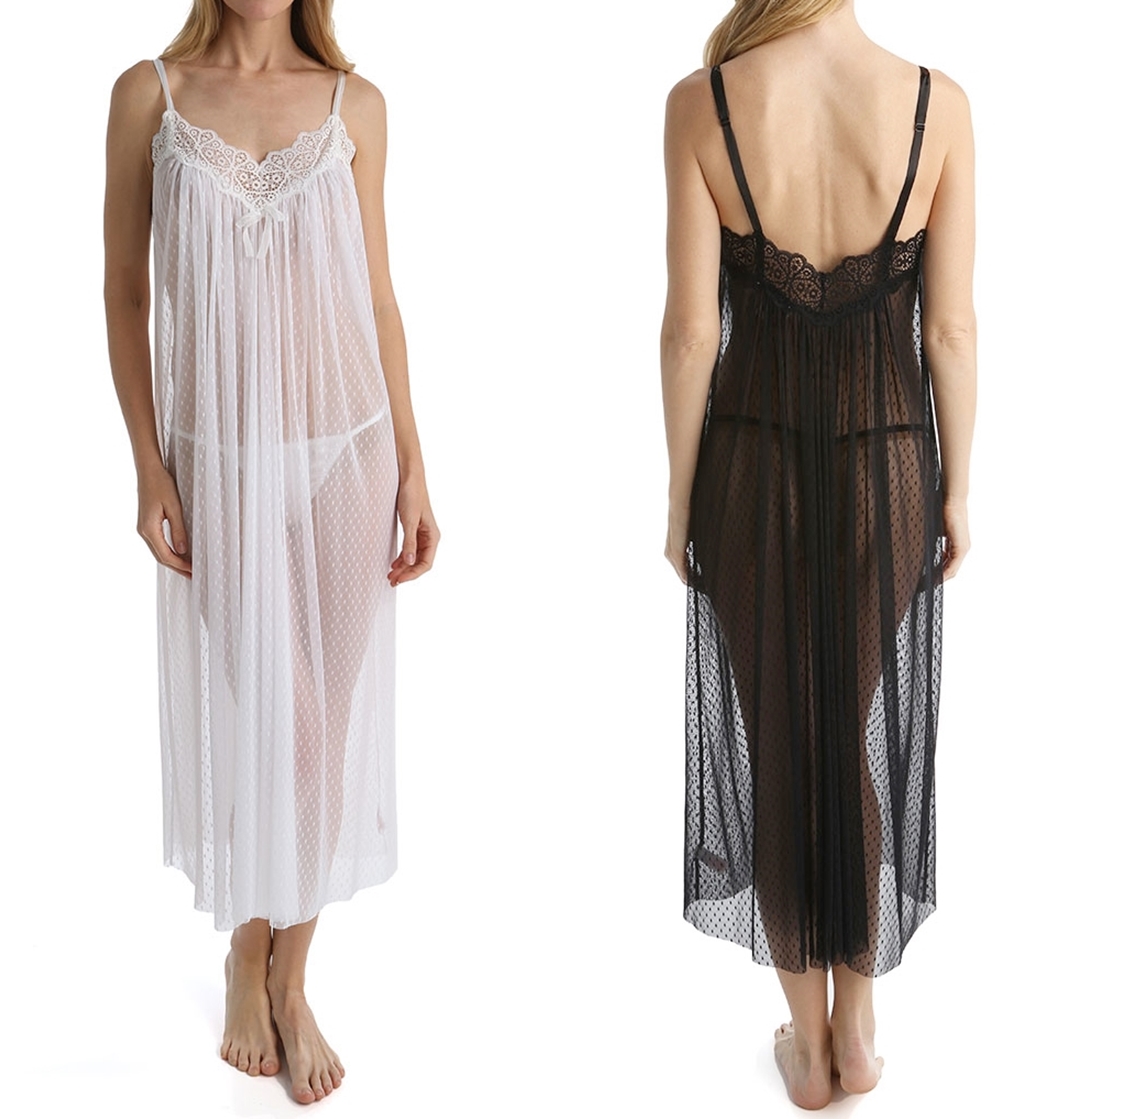 See Through Nightgown: Show Off Your Assets.